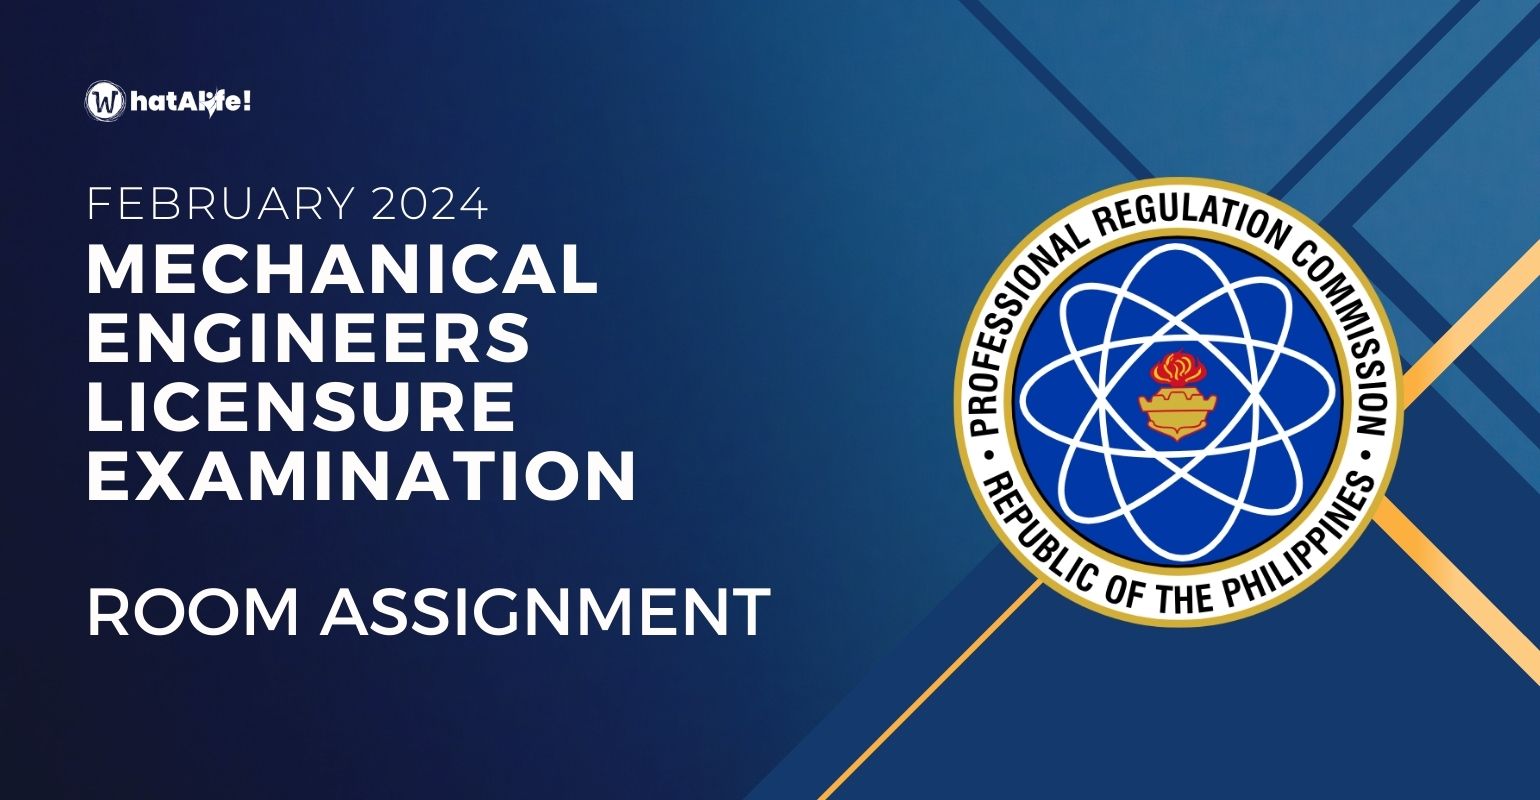 Room Assignment — February 2024 Mechanical Engineers Licensure Exam